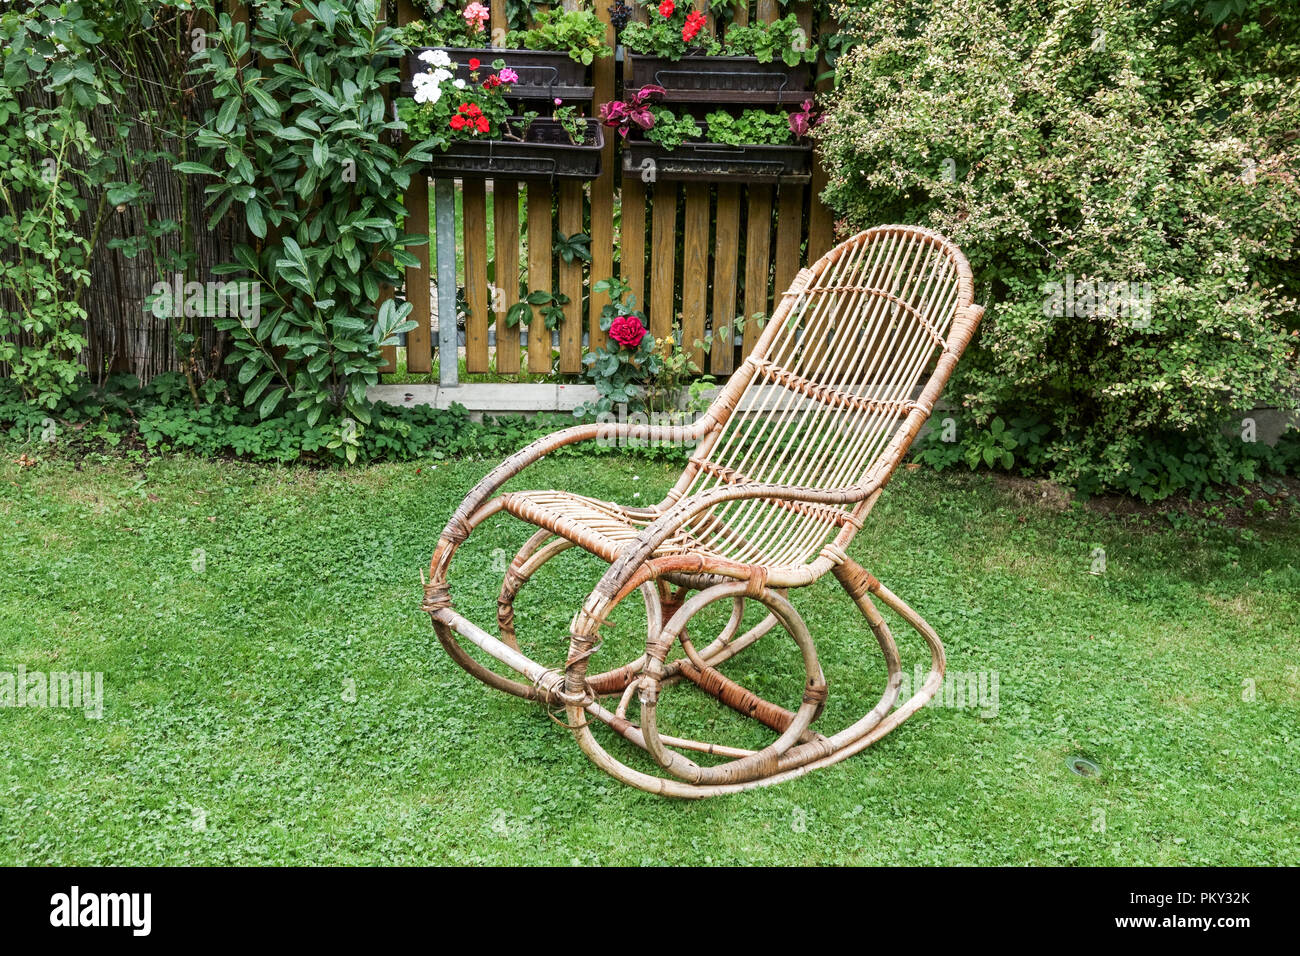 Still life with the old wicker rocking chair in the garden Stock Photo